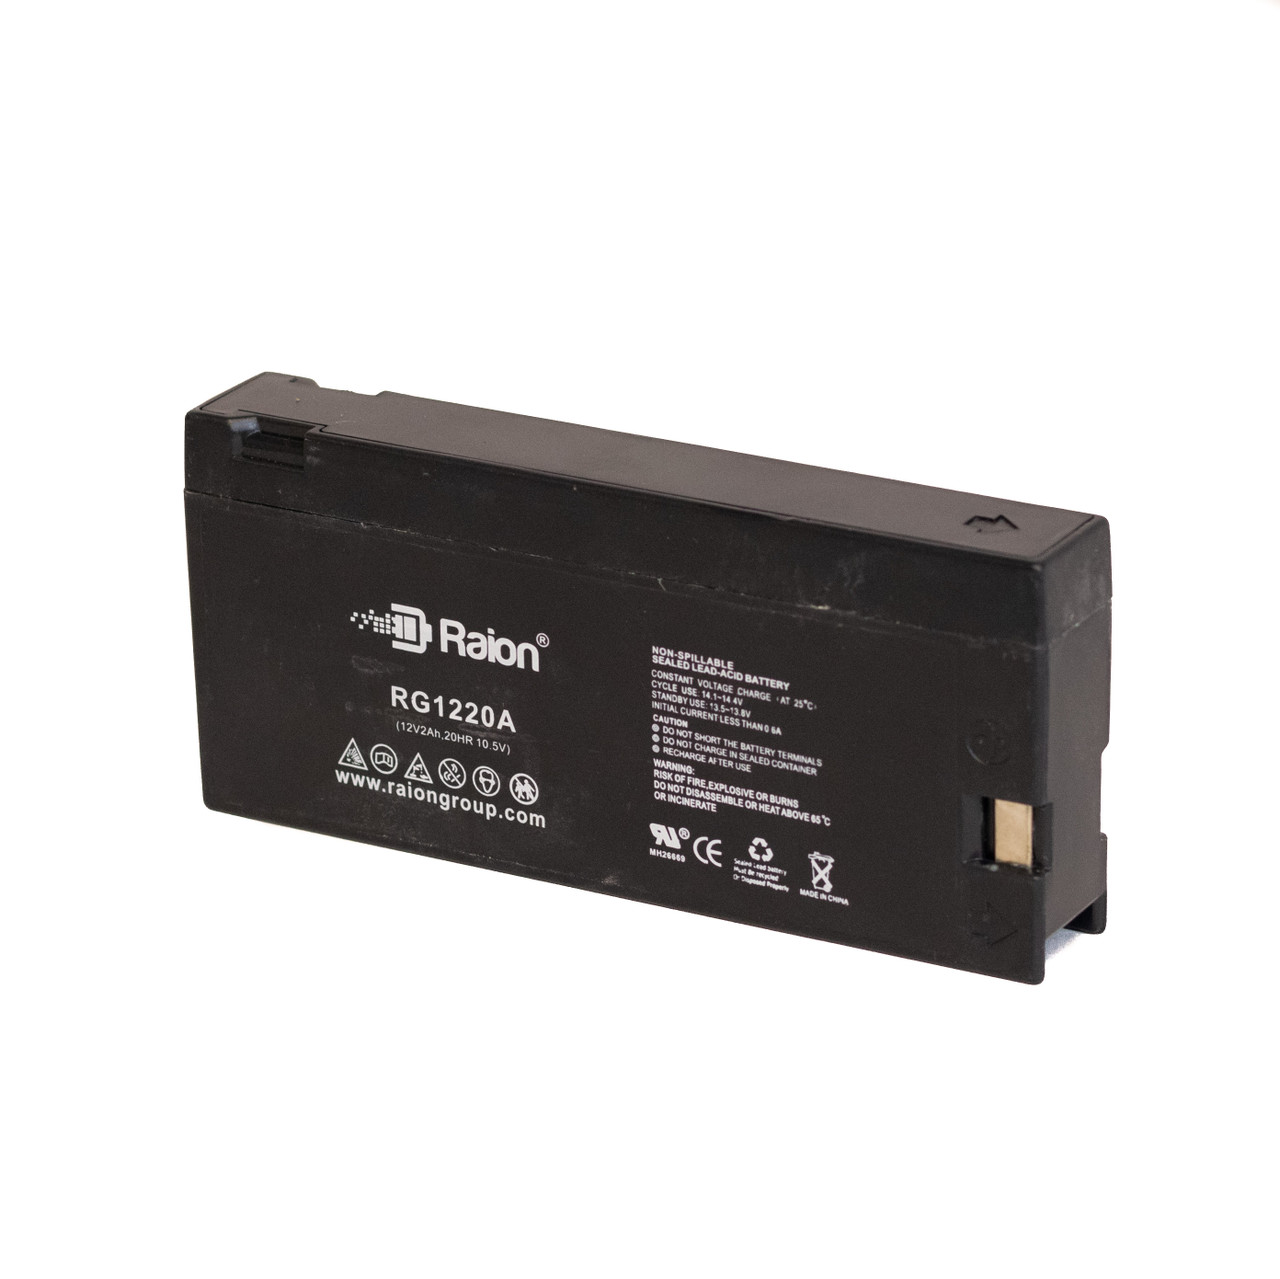 Raion Power RG1220A Replacement Battery for Chiway SJ12V2Ah-C